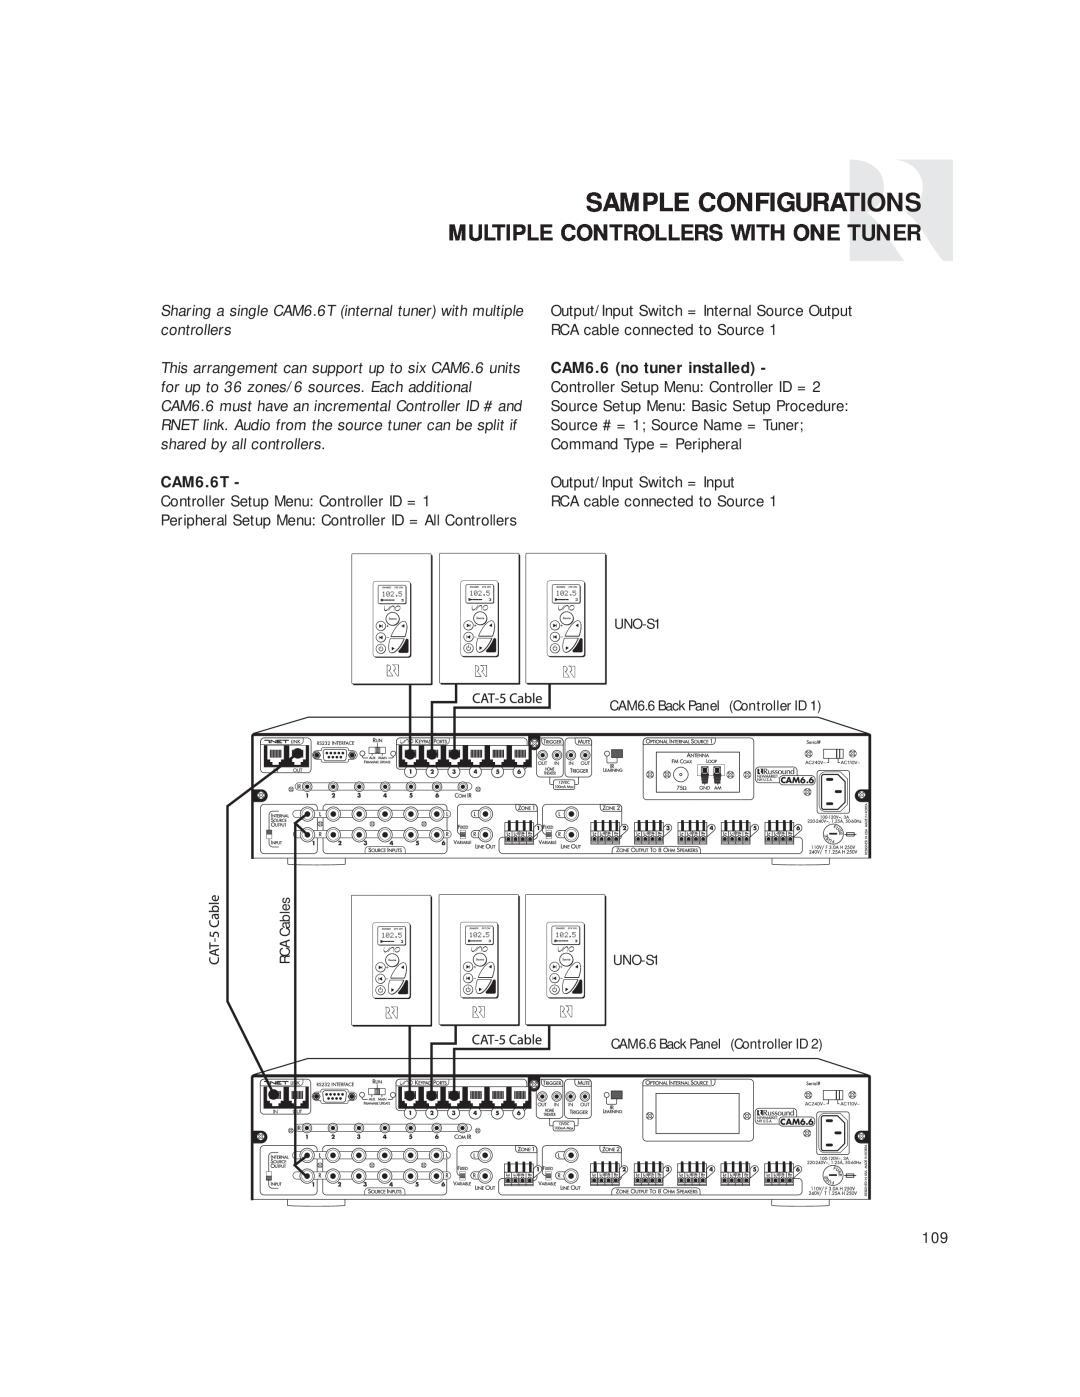 Russound instruction manual Sample Configurations, Multiple Controllers With One Tuner, CAM6.6T 